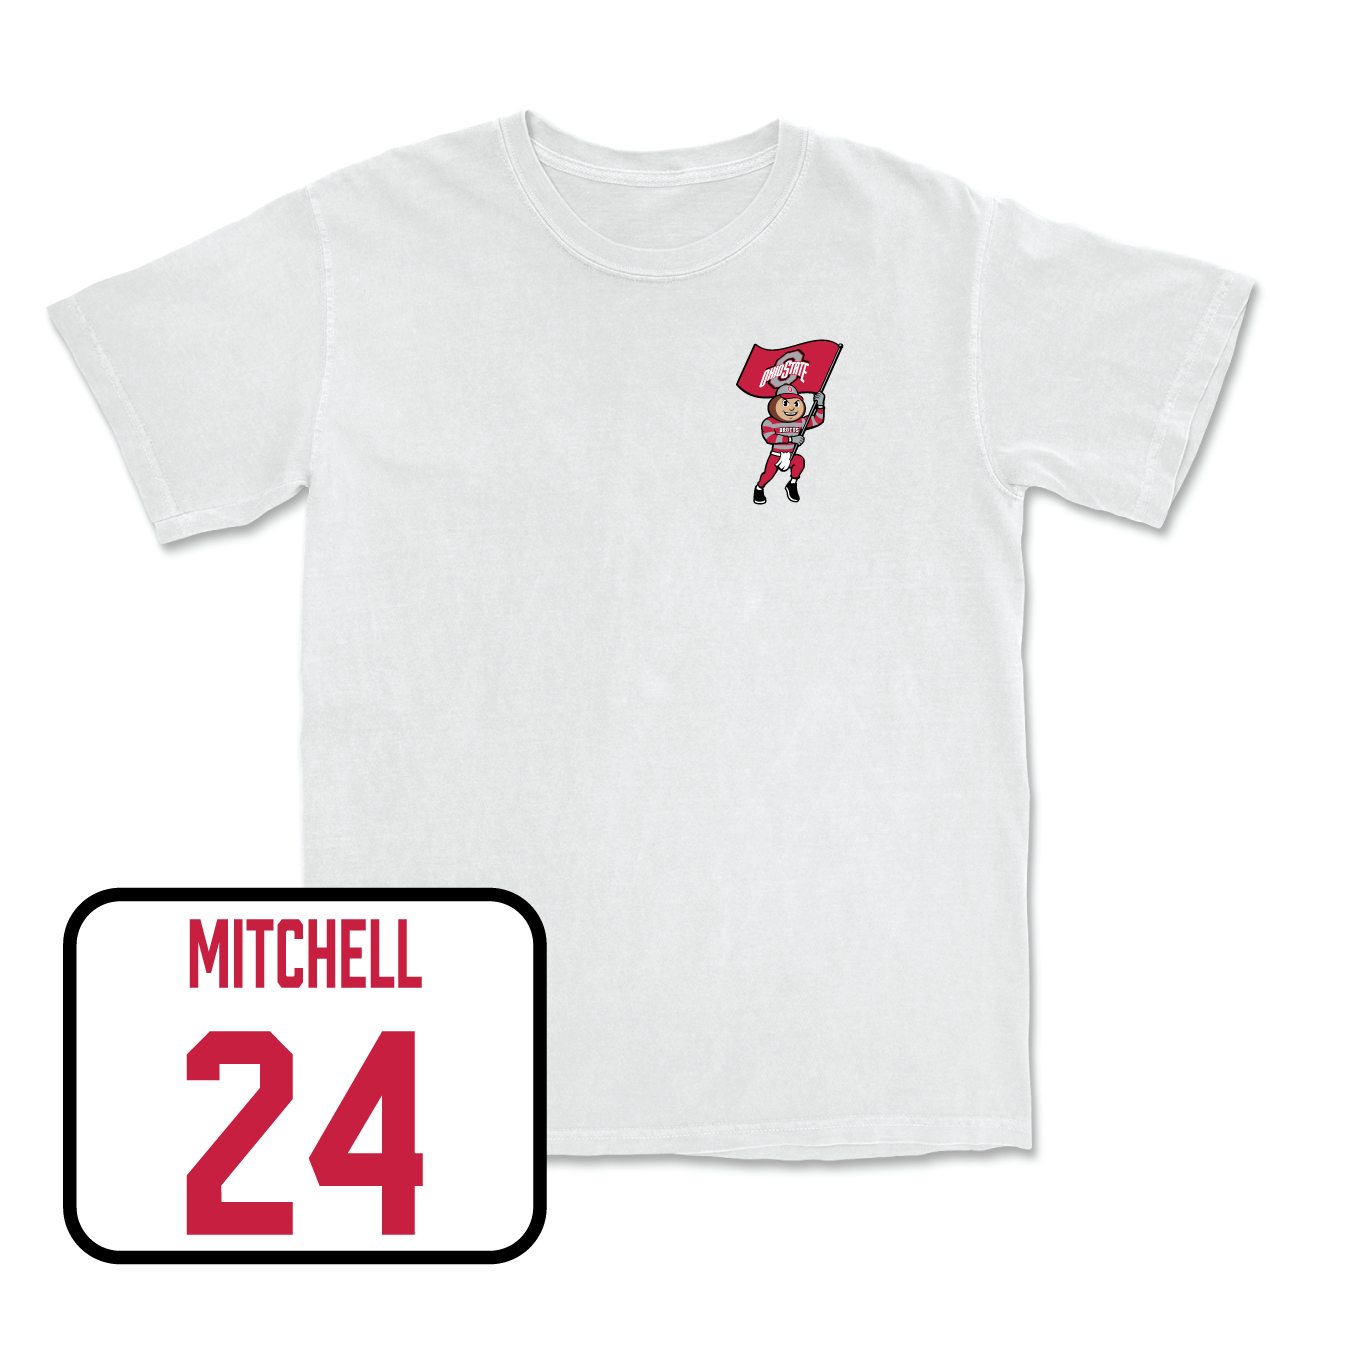 White Men's Lacrosse Brutus Comfort Colors Tee 2 Youth Small / Connor Mitchell | #24